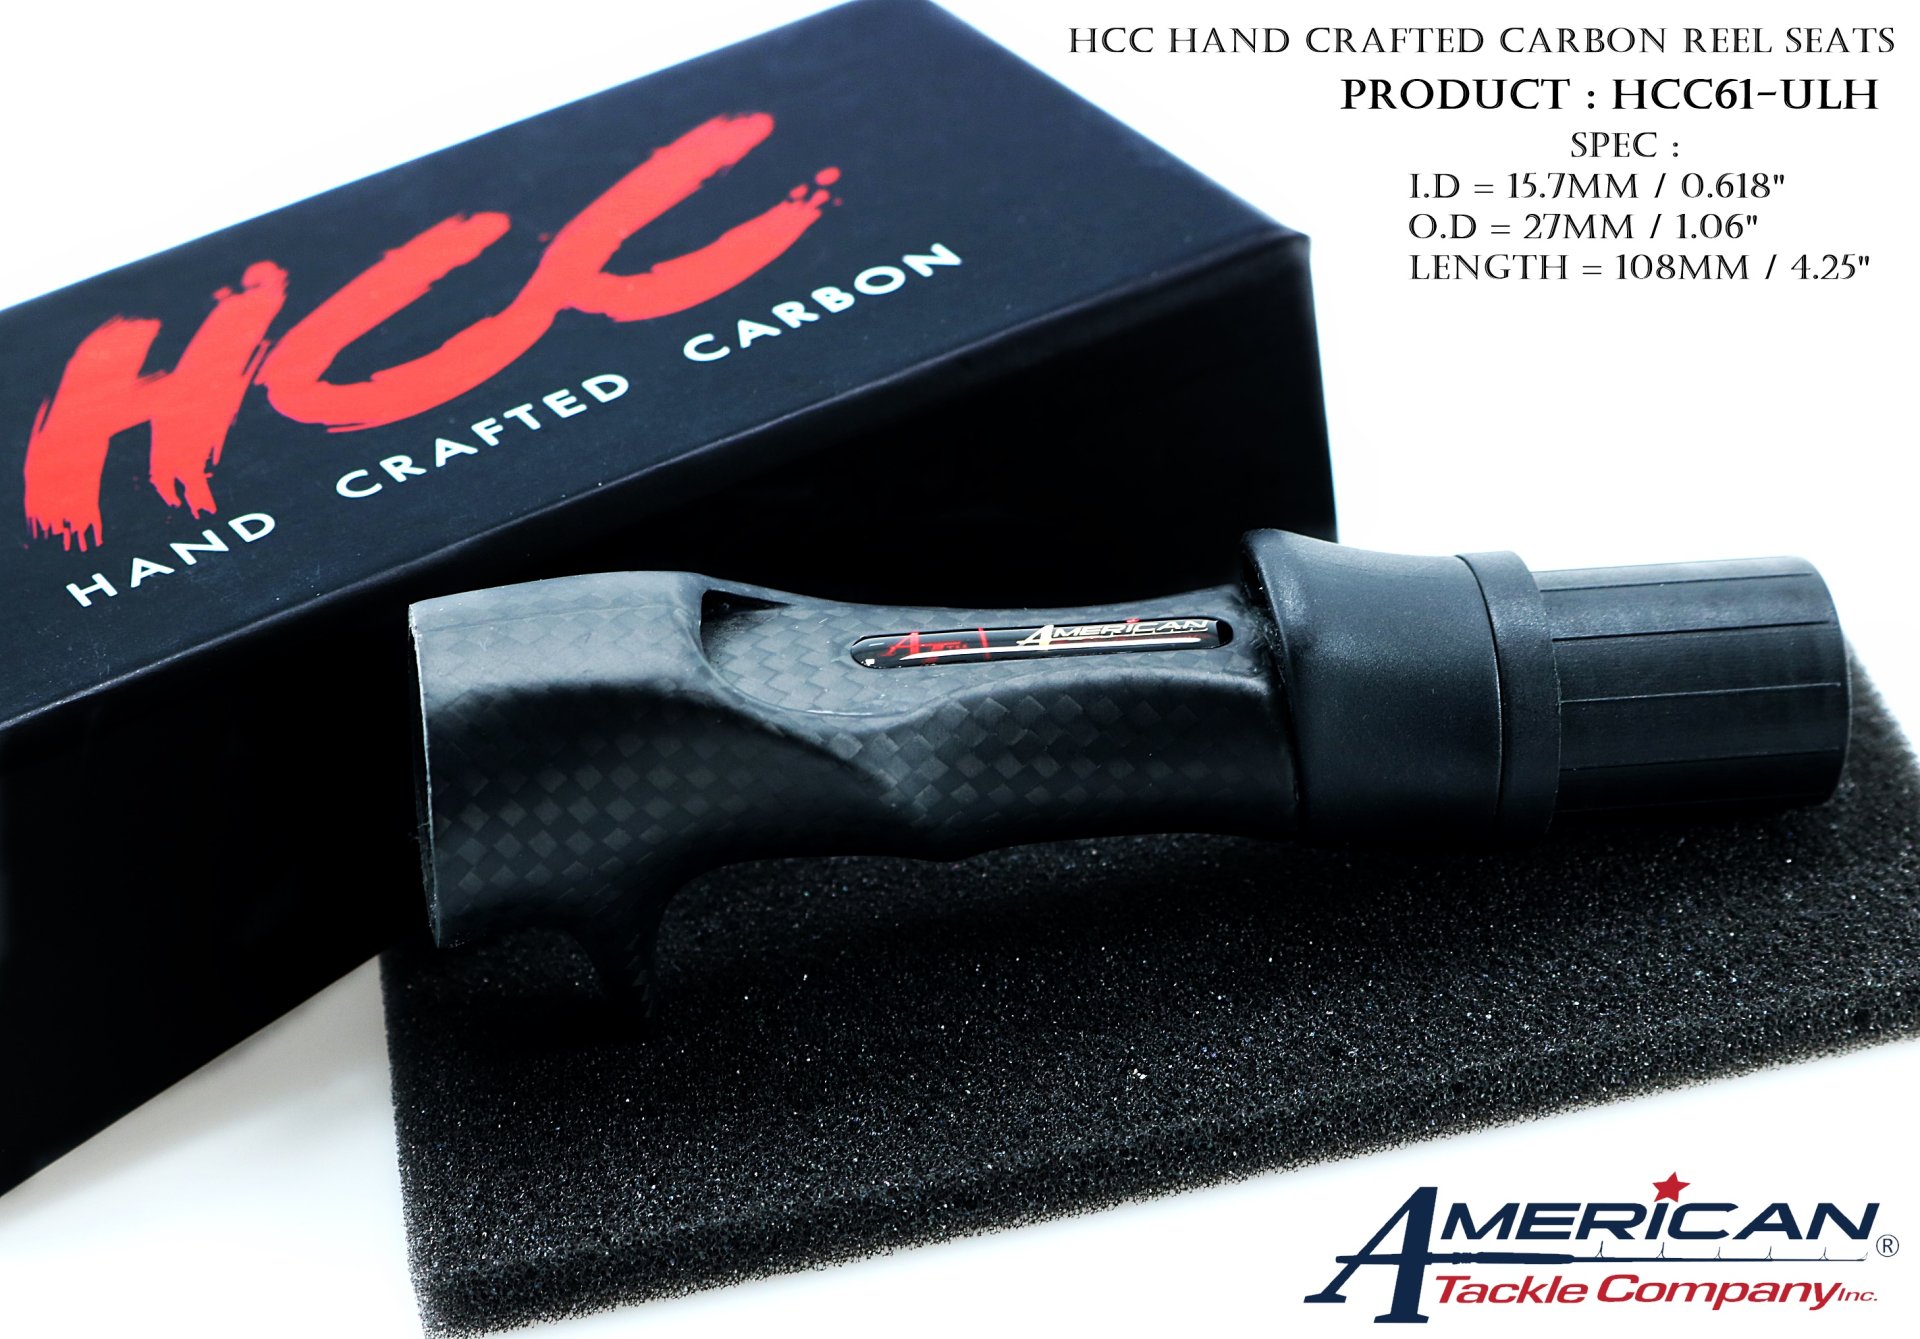 HCC Hand Crafted Carbon Reel Seats